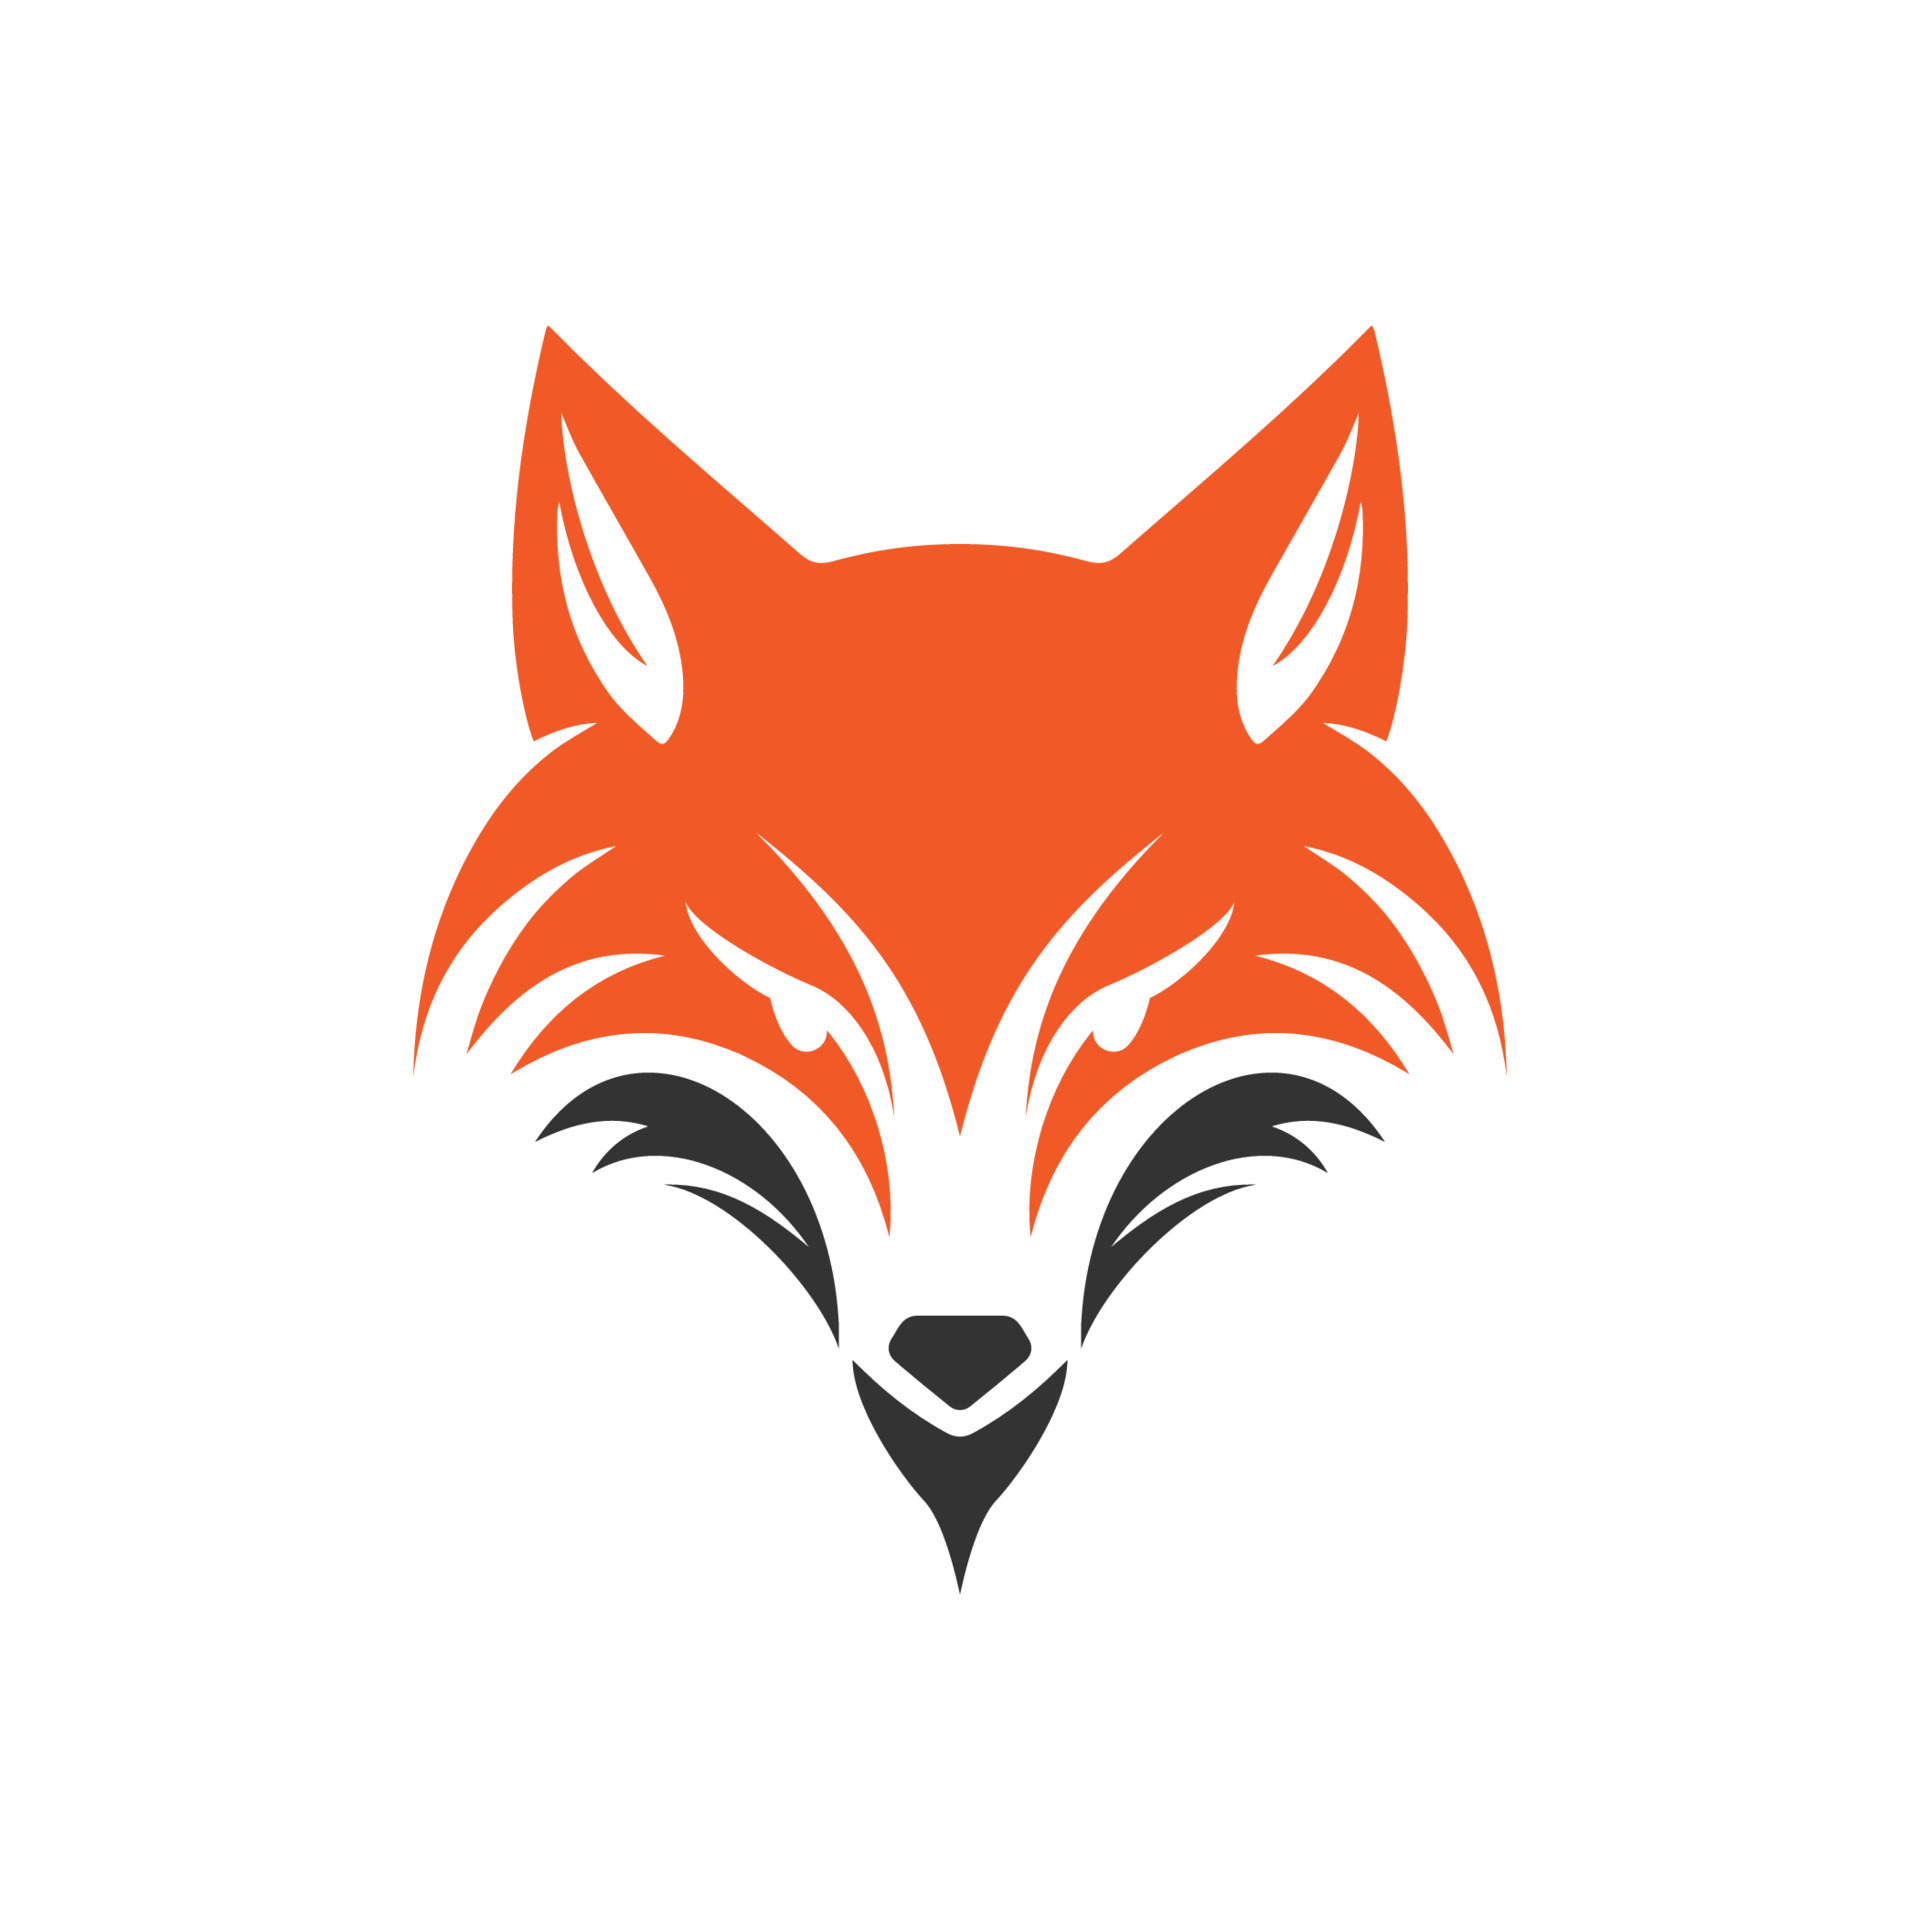 a minimalistic abstract fox head logo in a simple flat design style ...